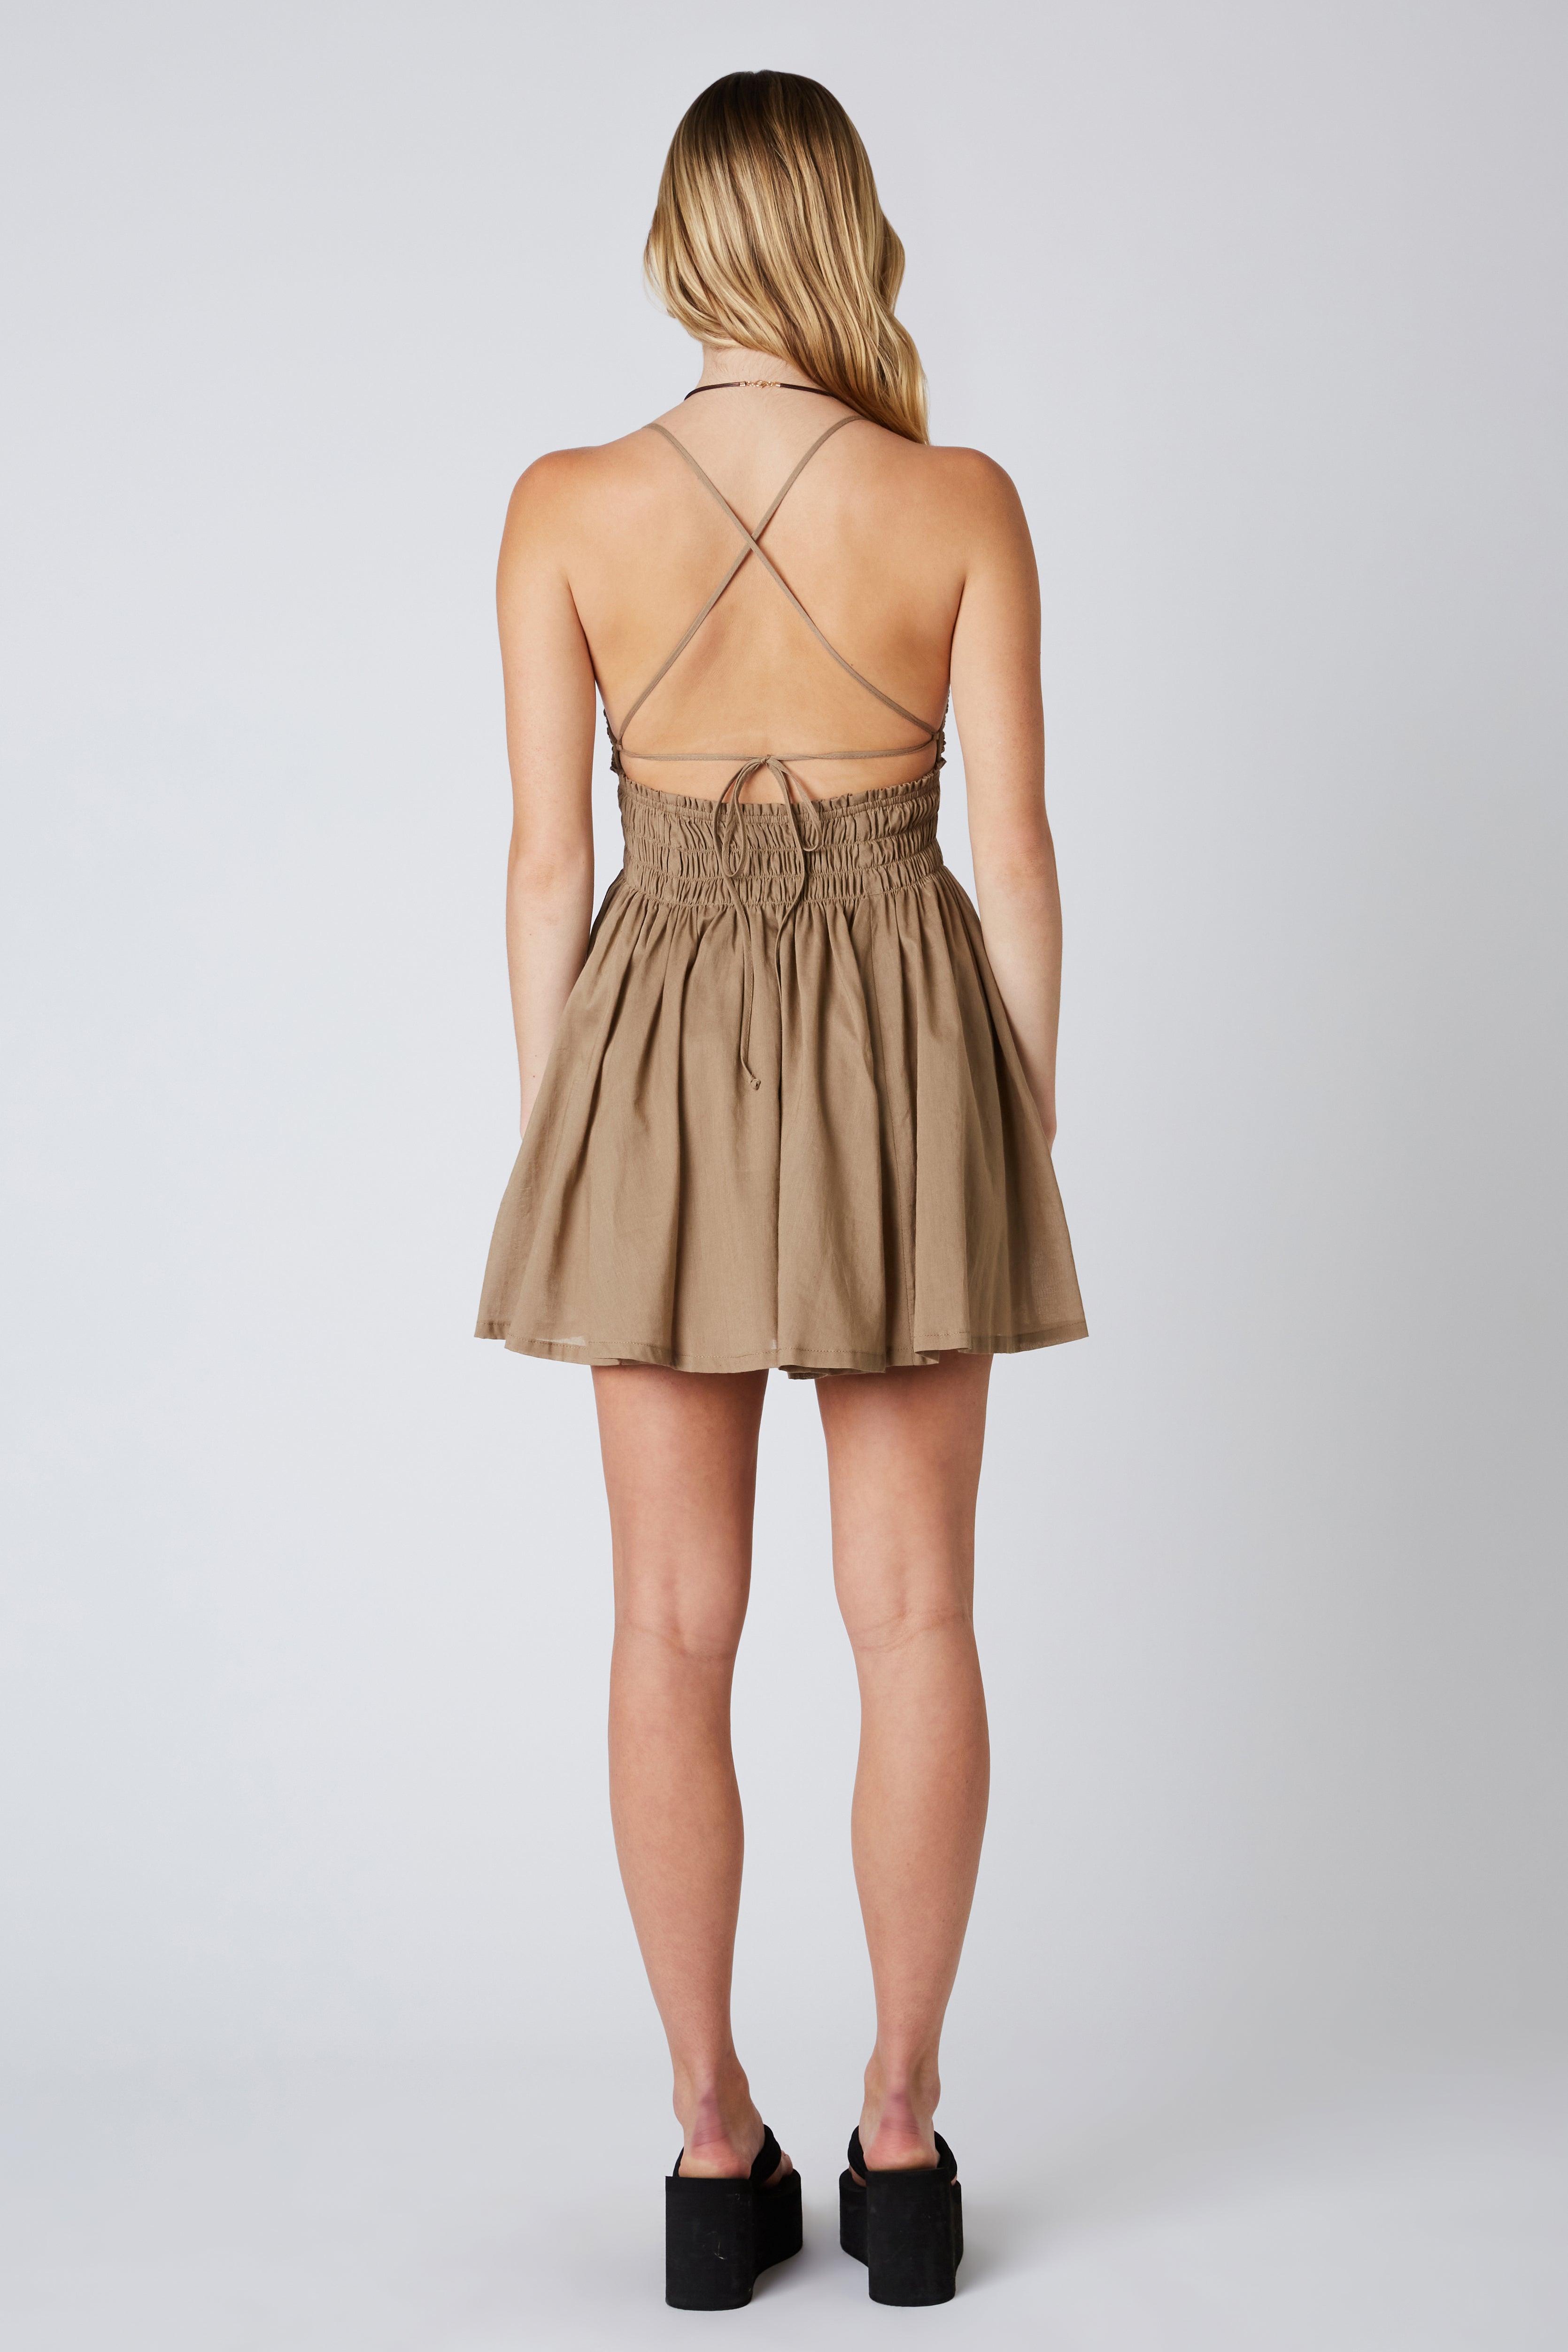 Cotton Sun Dress in Taupe Back View